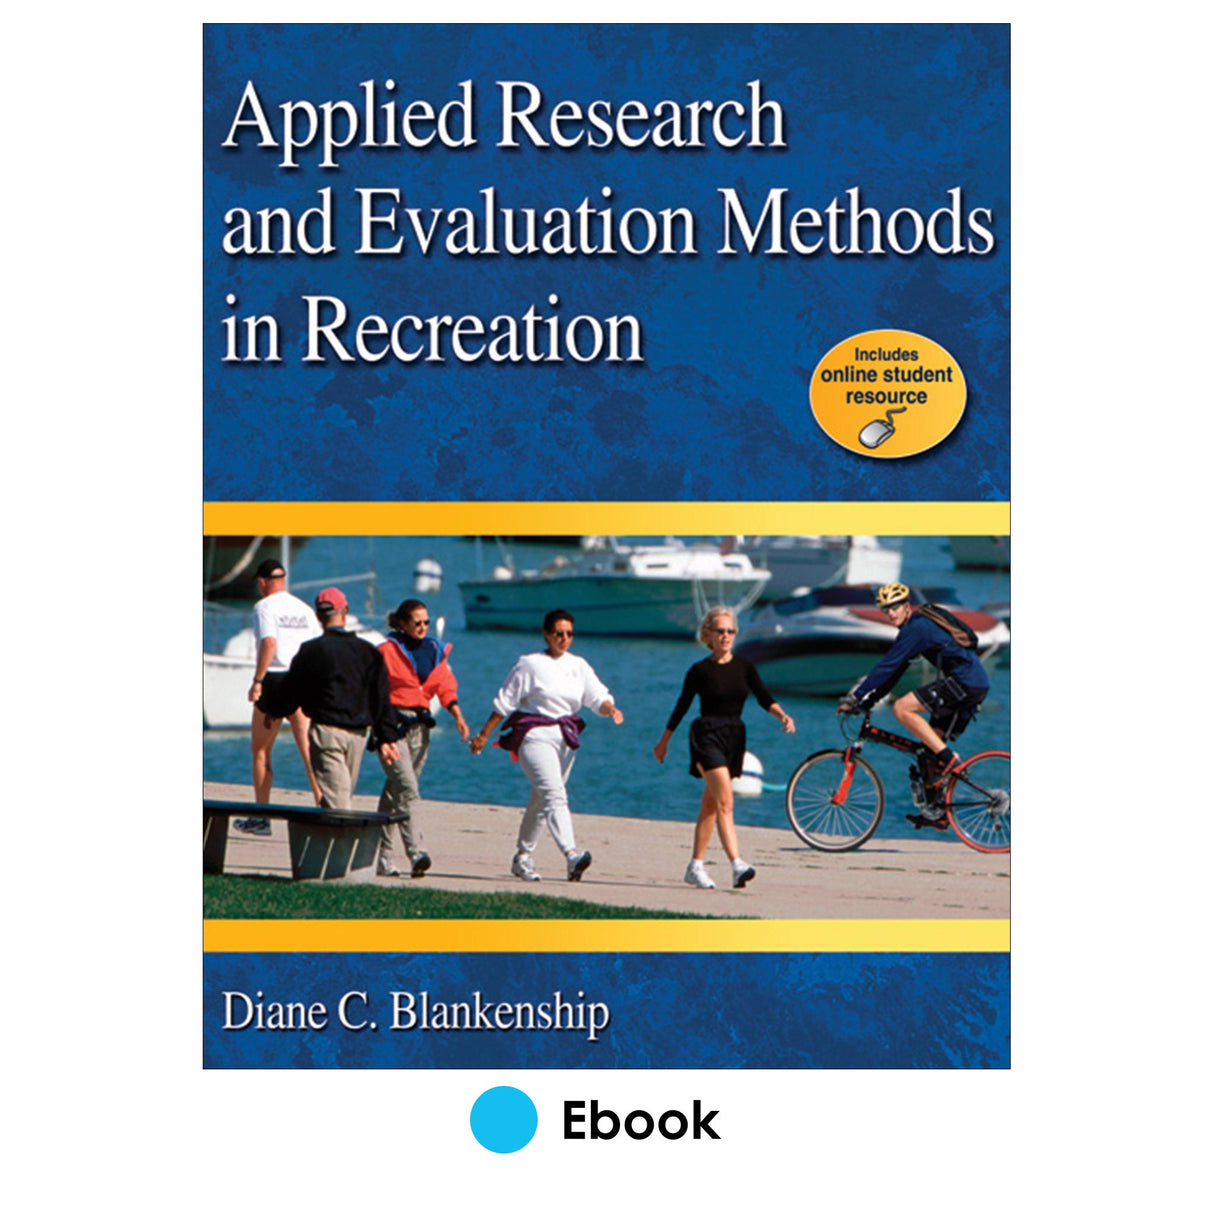 Applied Research and Evaluation Methods in Recreation PDF